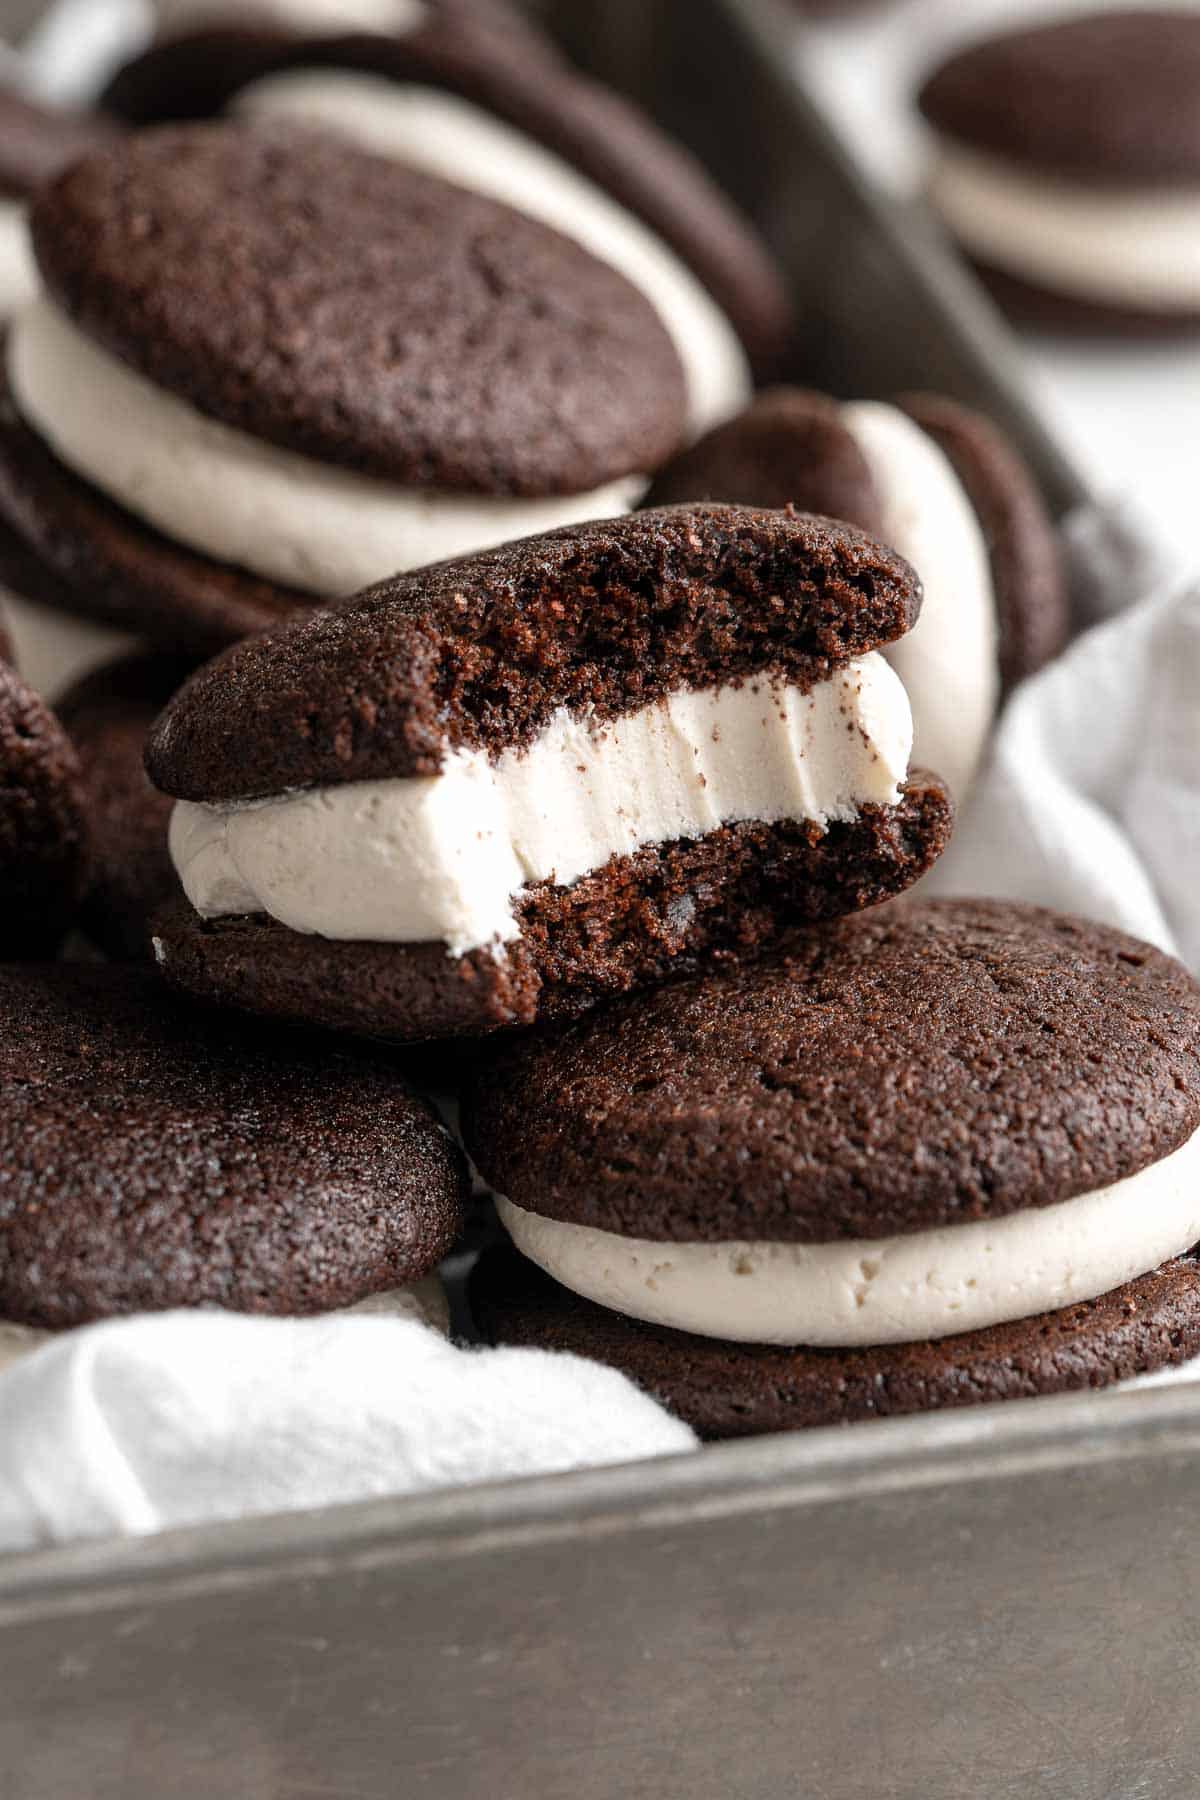 Chocolate Whoopie Pies are a classic American dessert made with two cake-like chocolate cookies sandwiched together with a creamy marshmallow filling. | aheadofthyme.com